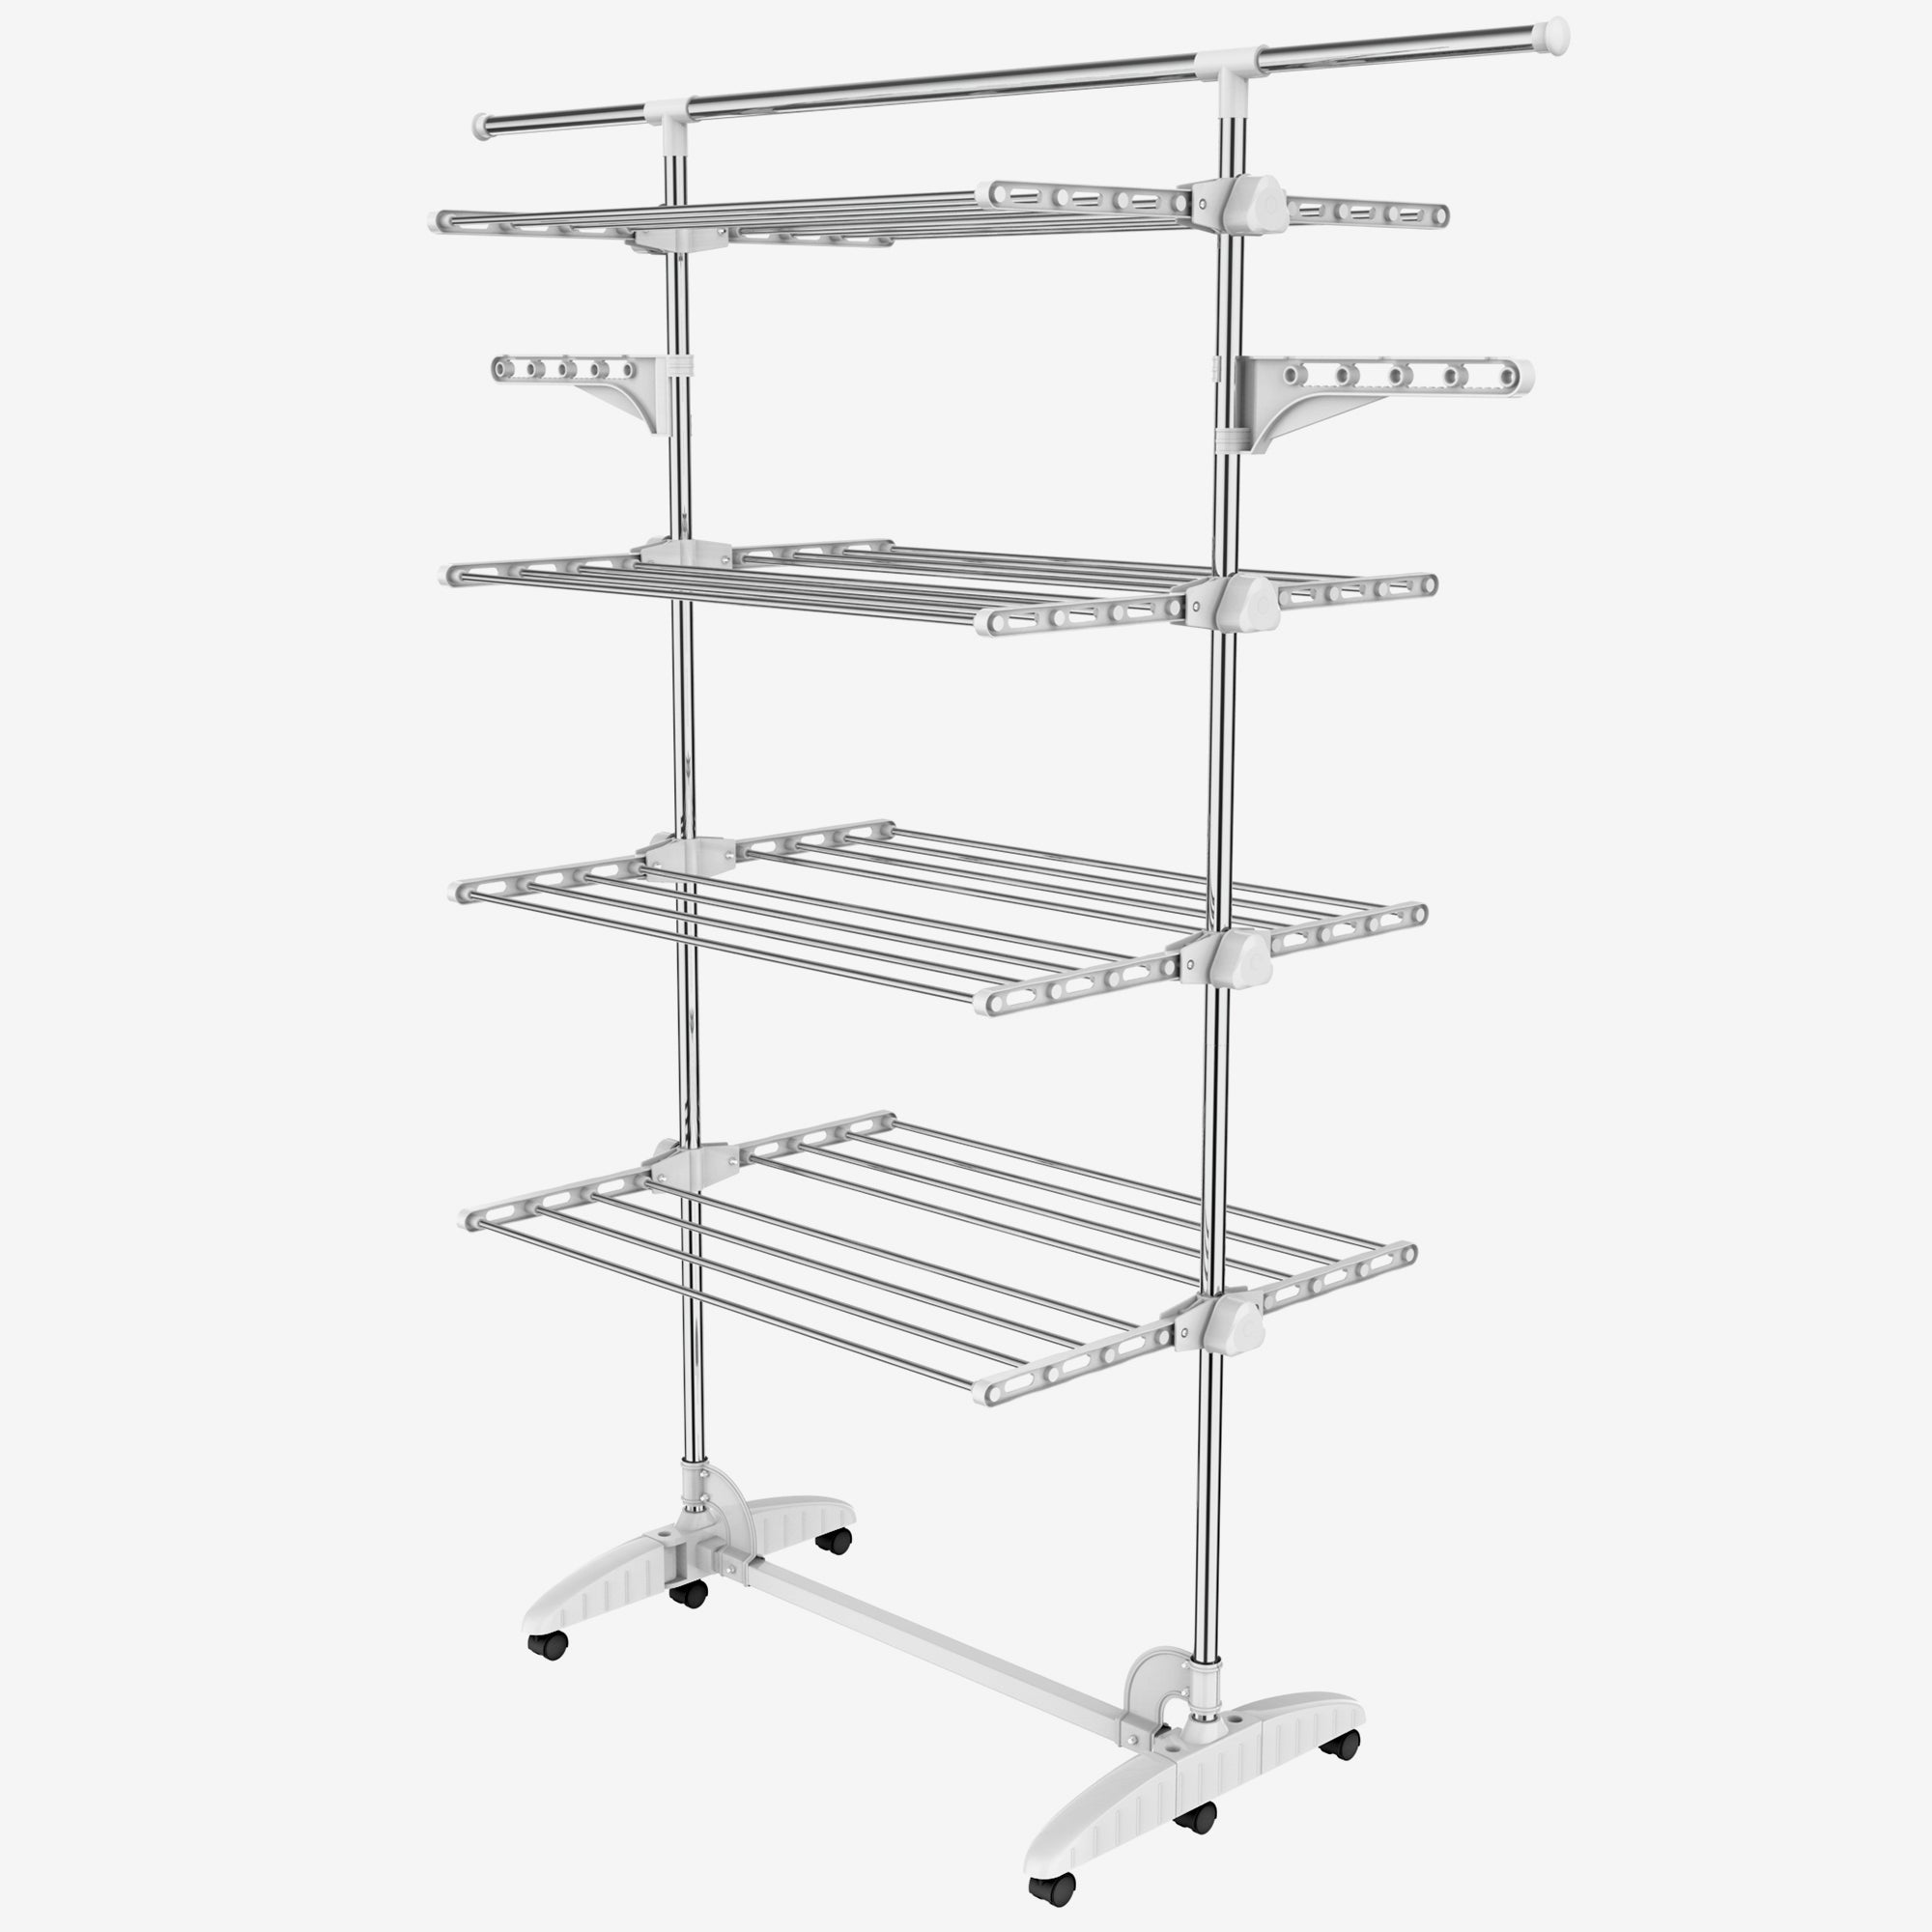 Laundry-Drying-Rack-4-shelves-with-extendable-top-bar-White-Laundry-Drying-Rack-4-shelves-White-With-wings-and-extended-top-bar-Material-Stainless-steel-tubes